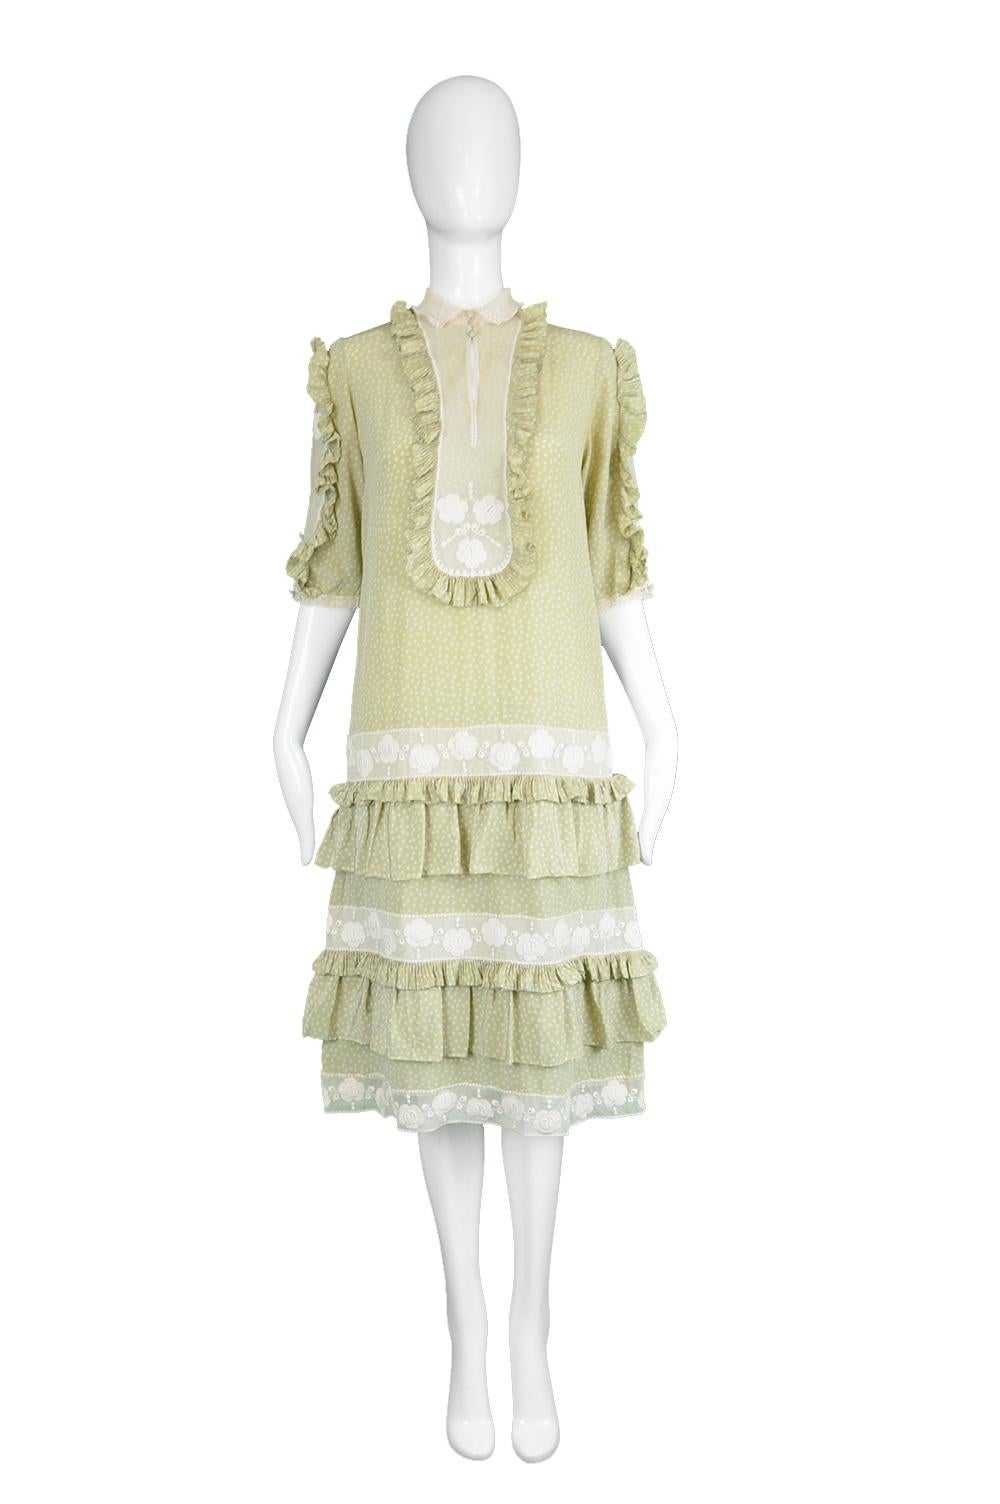 Chloé by Karl Lagerfeld 1970s Vintage Green Ruffled Silk & Embroidered Lace Dress

Please Click 'Continue Reading' below for full description and size. 

Size: fits roughly like a modern women's UK 12-14/ US 8-10/ EU 40-42. Please check all